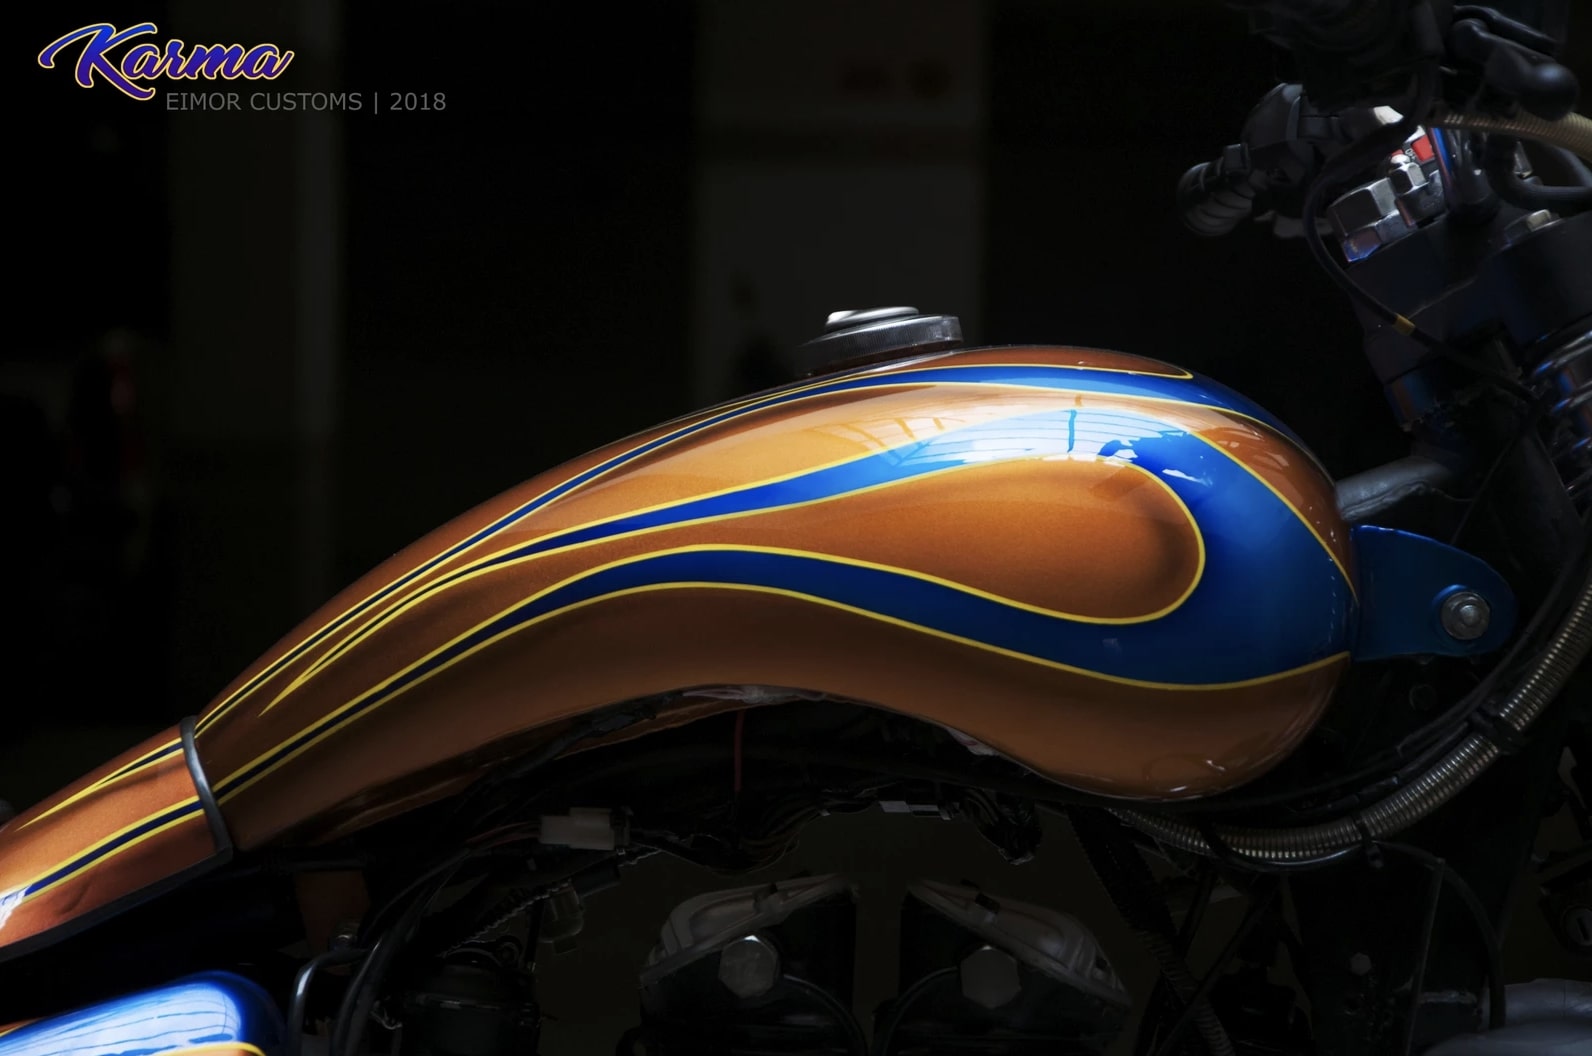 Meet Karma 350 - Based on the Royal Enfield Thunderbird Motorcycle - foreground